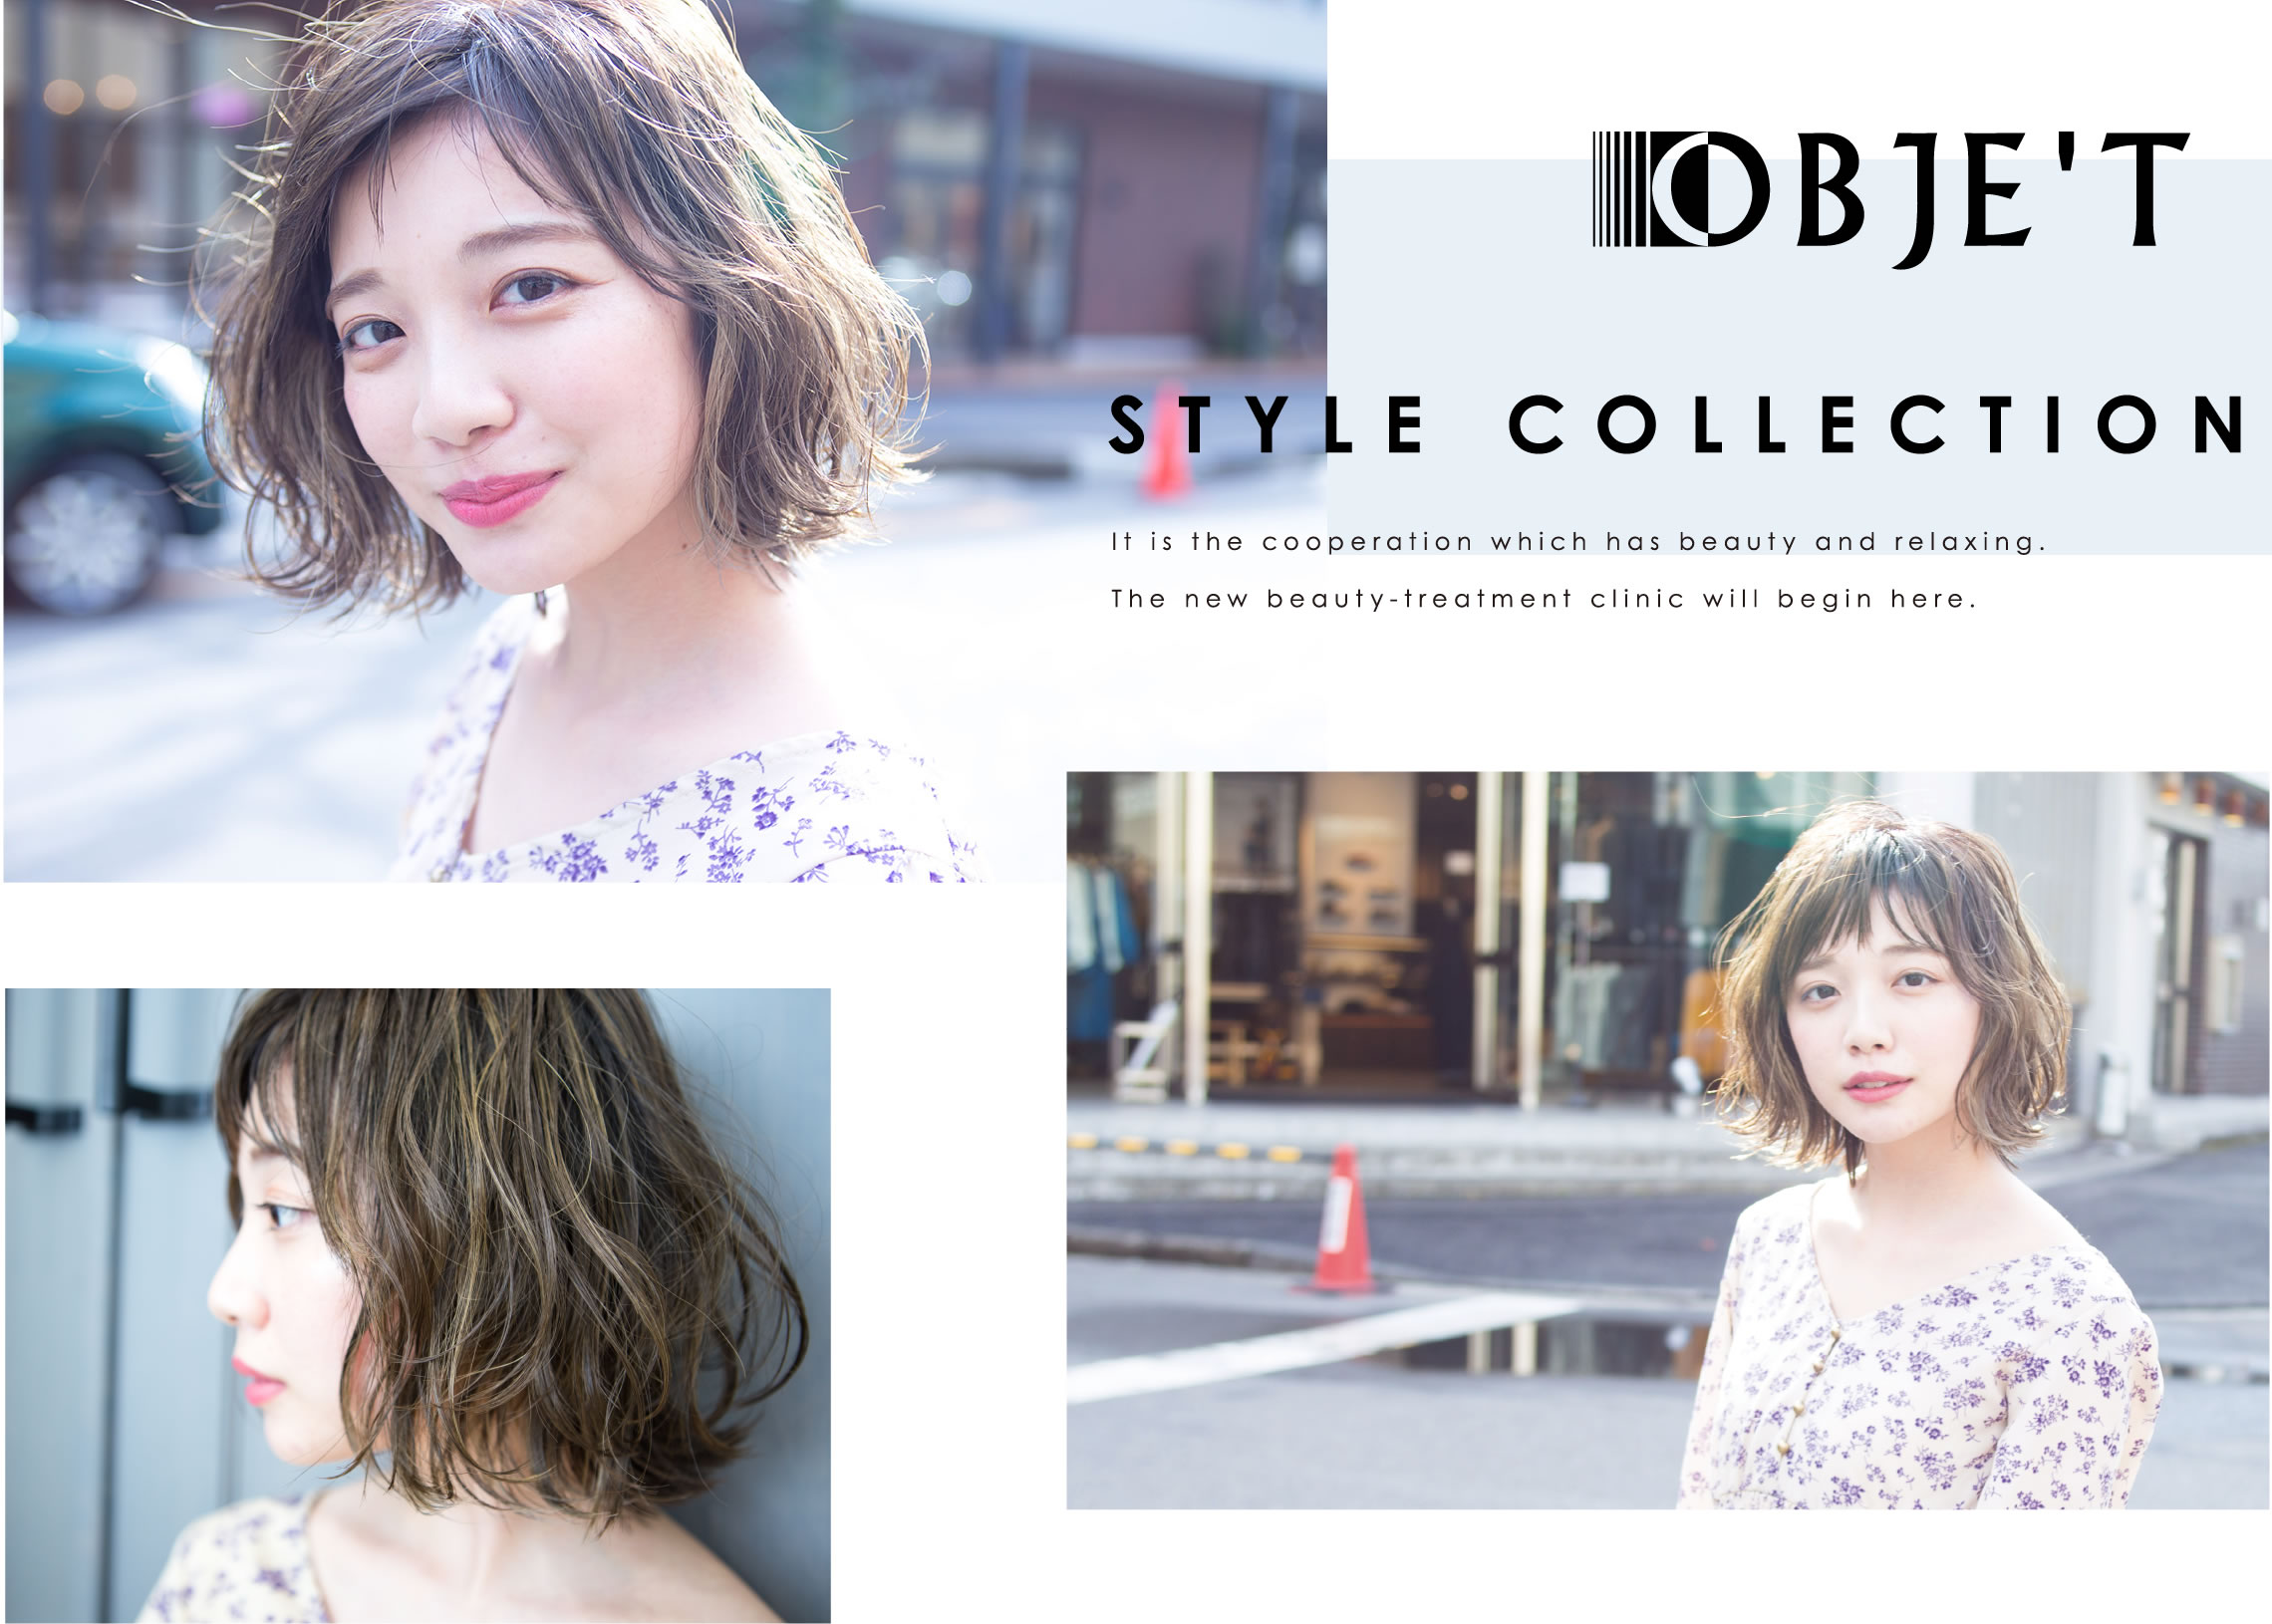 STYLE COLLECTION